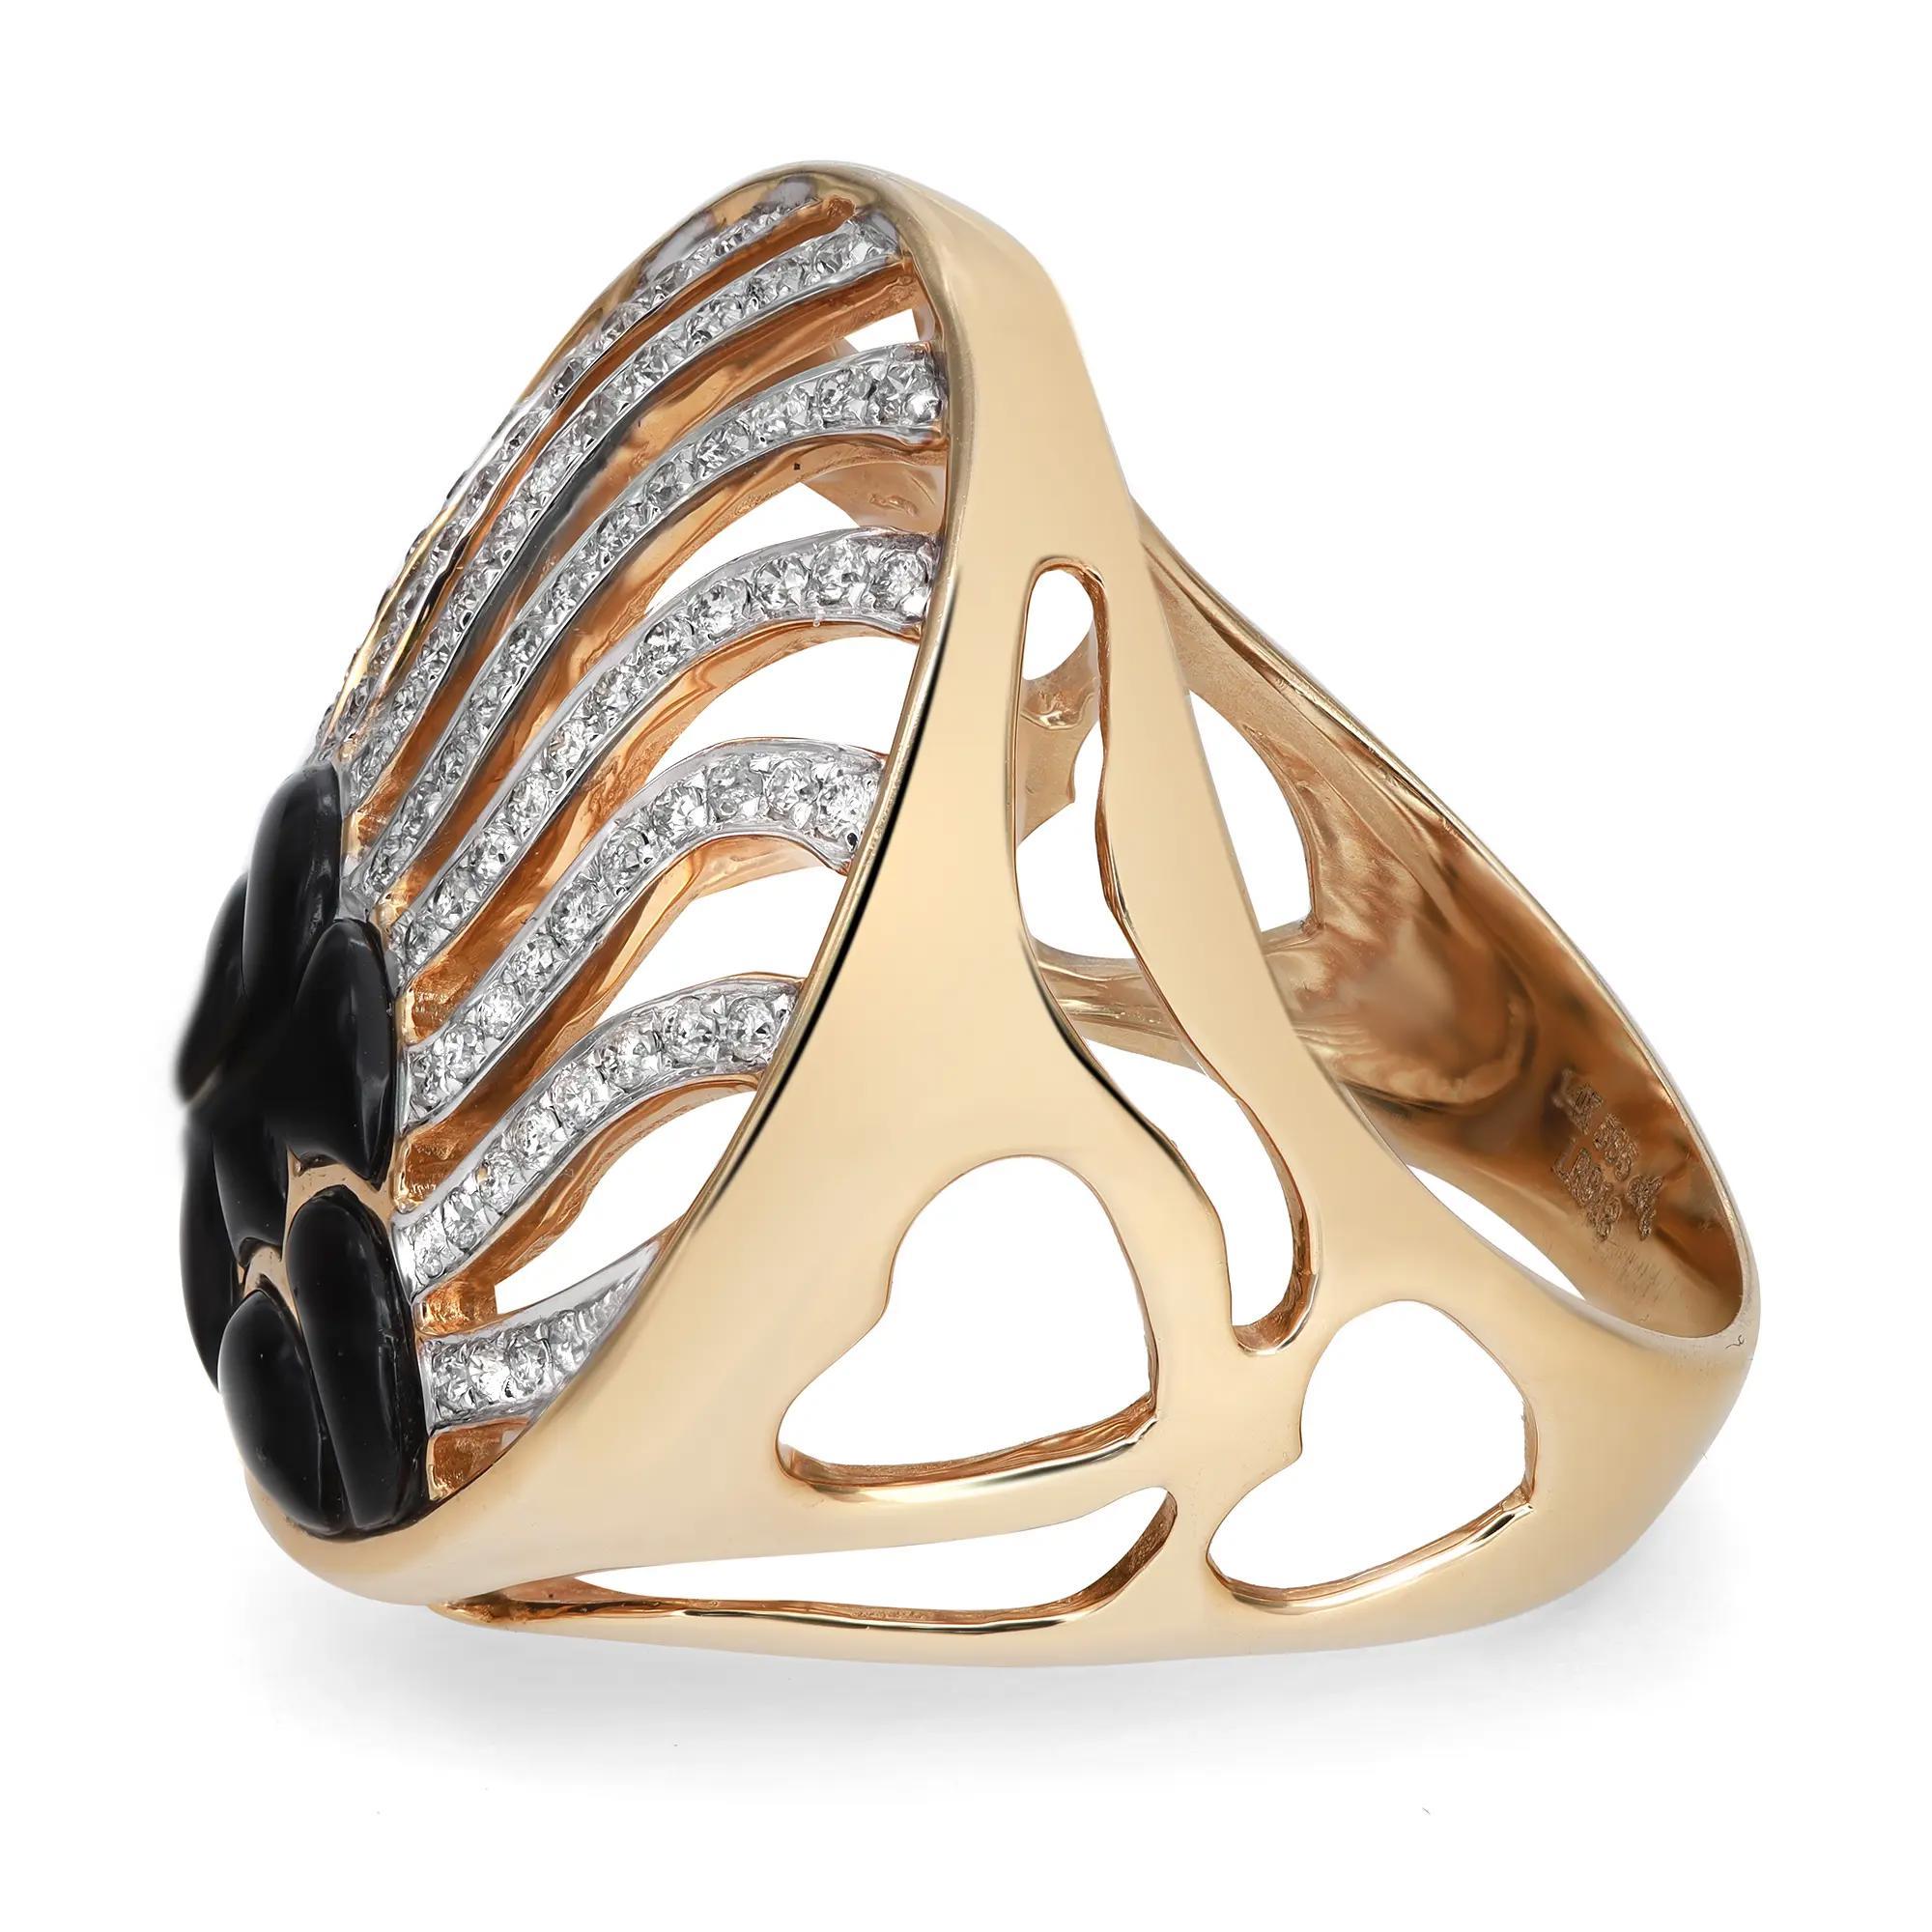 This bold and beautiful ring features pave set round cut diamonds set in a wave pattern with black onyx. Total diamond weight: 0.37 carat. Diamond color H-I and SI1 clarity. Crafted in brightly polished 14k yellow gold. The ring size is 7.5 and the